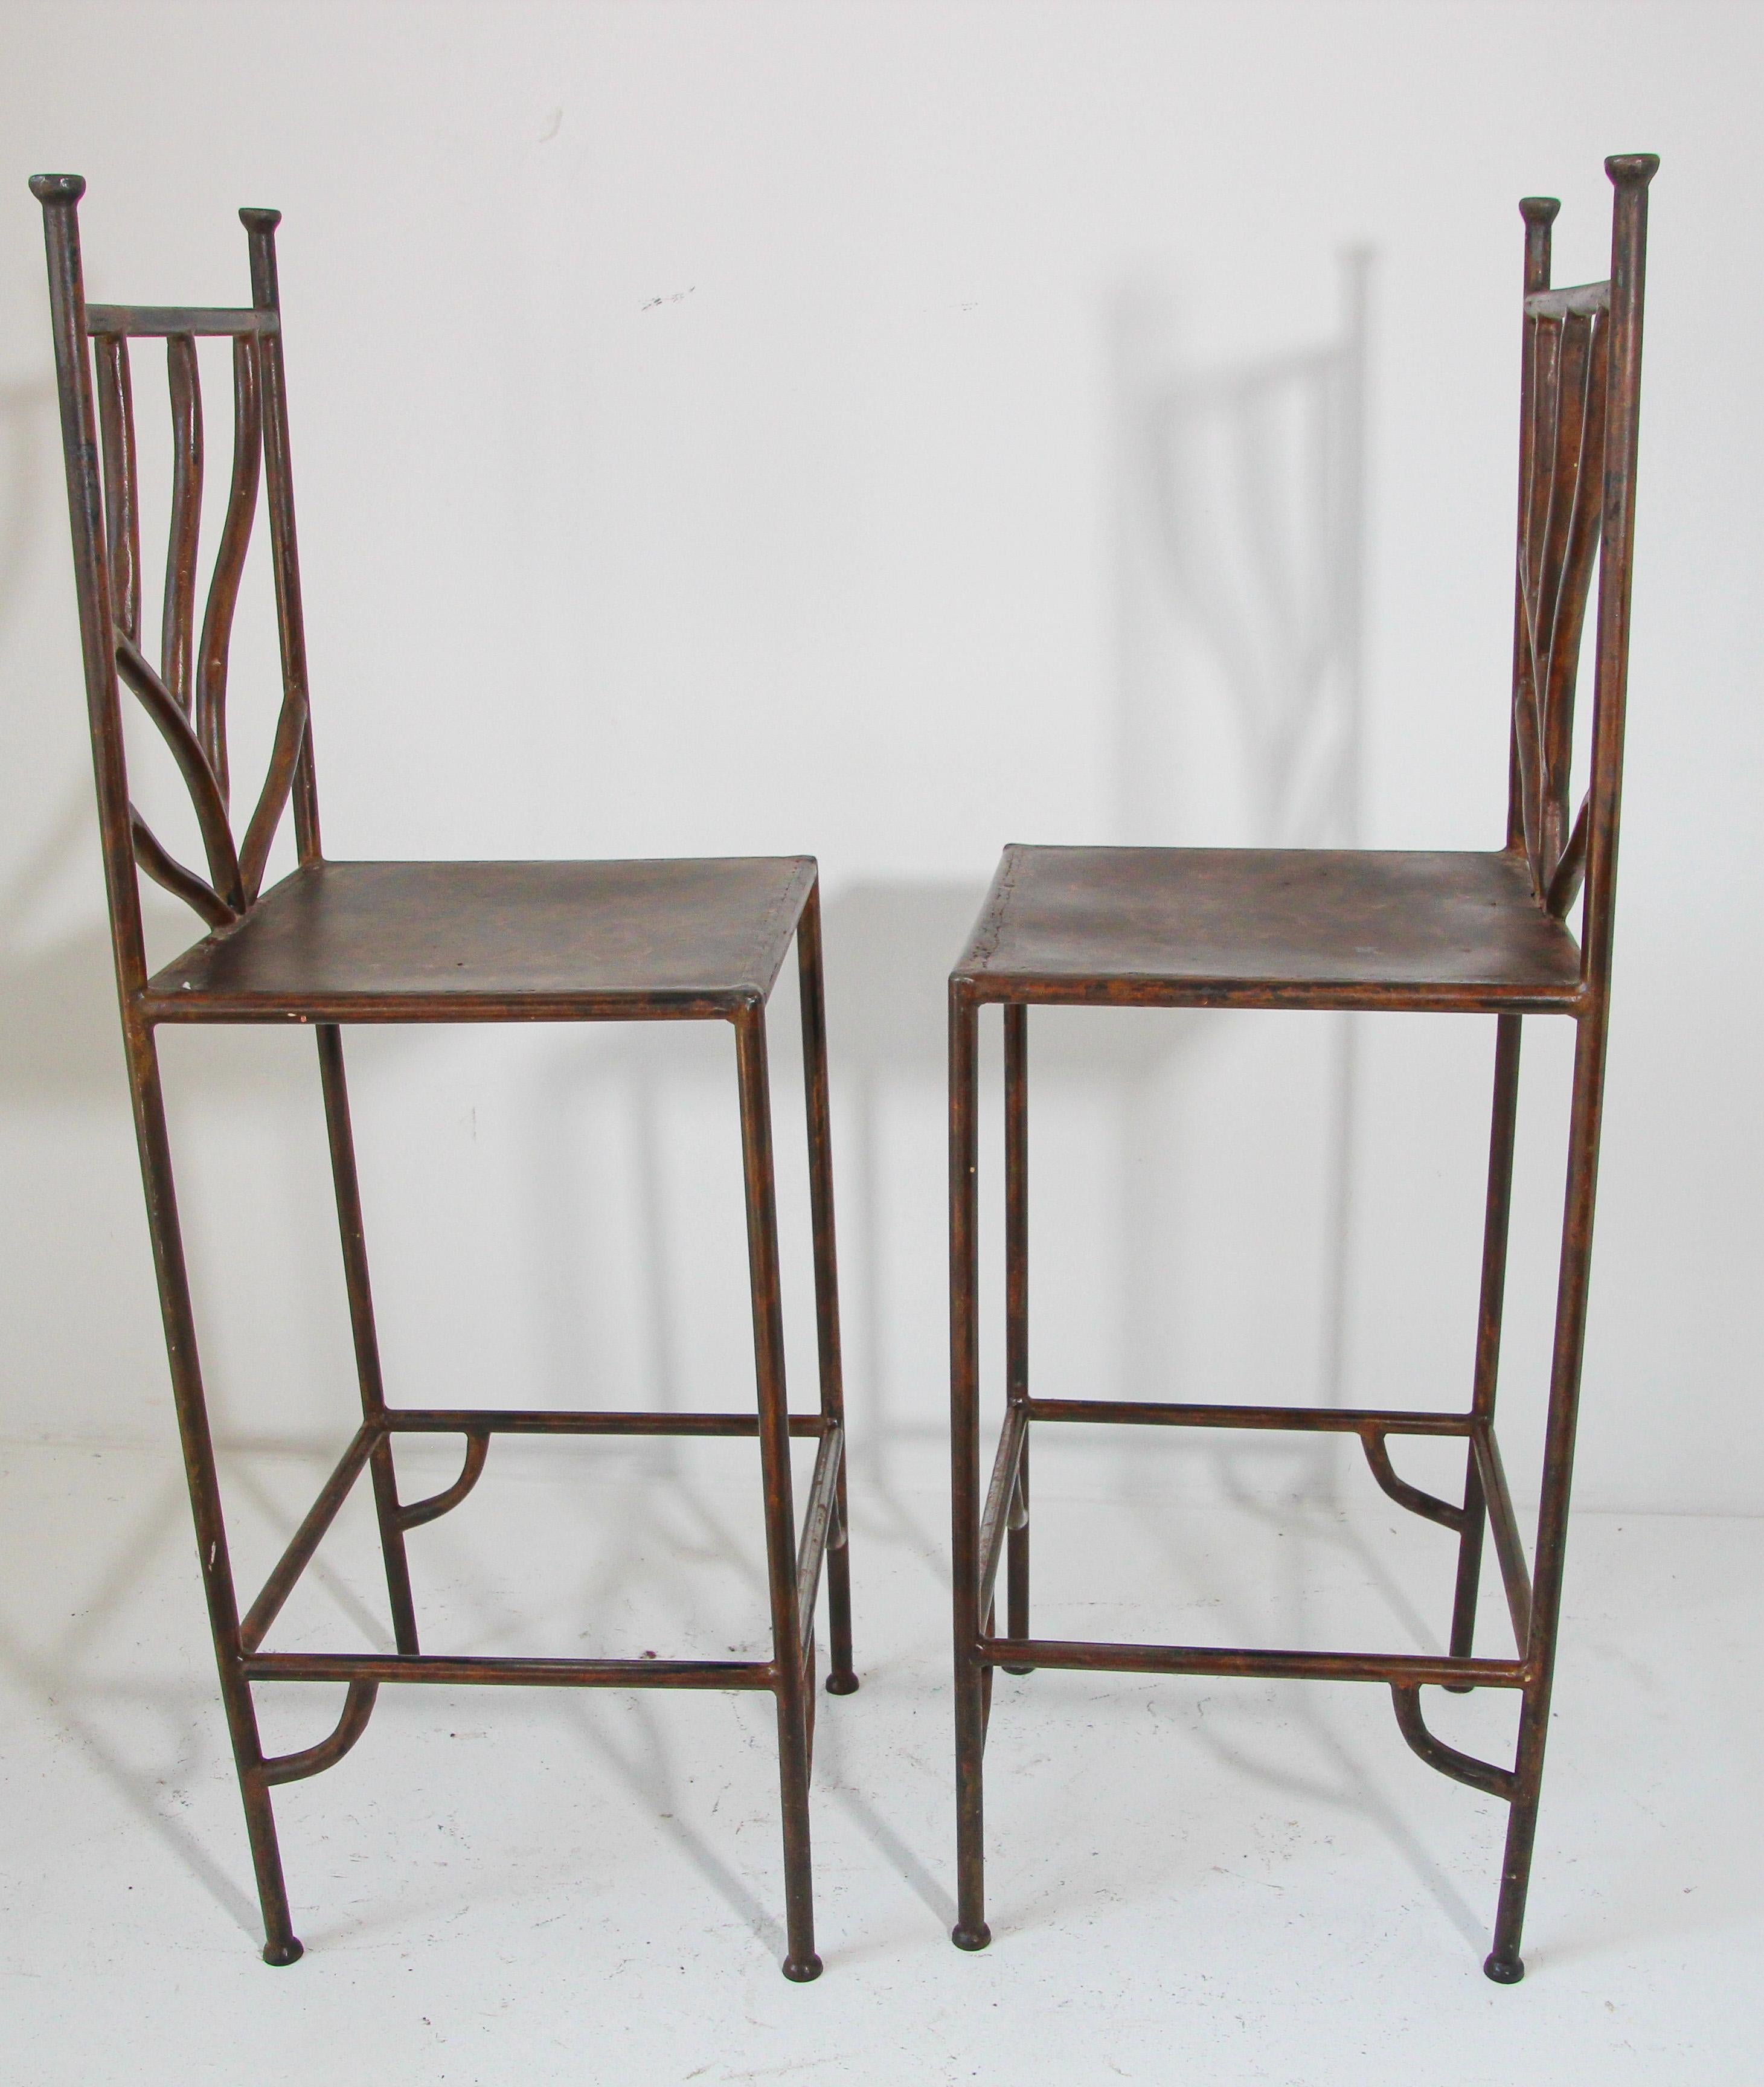 Vintage Wrought Iron Barstools with Back Set of Two Spanish Revival For Sale 3